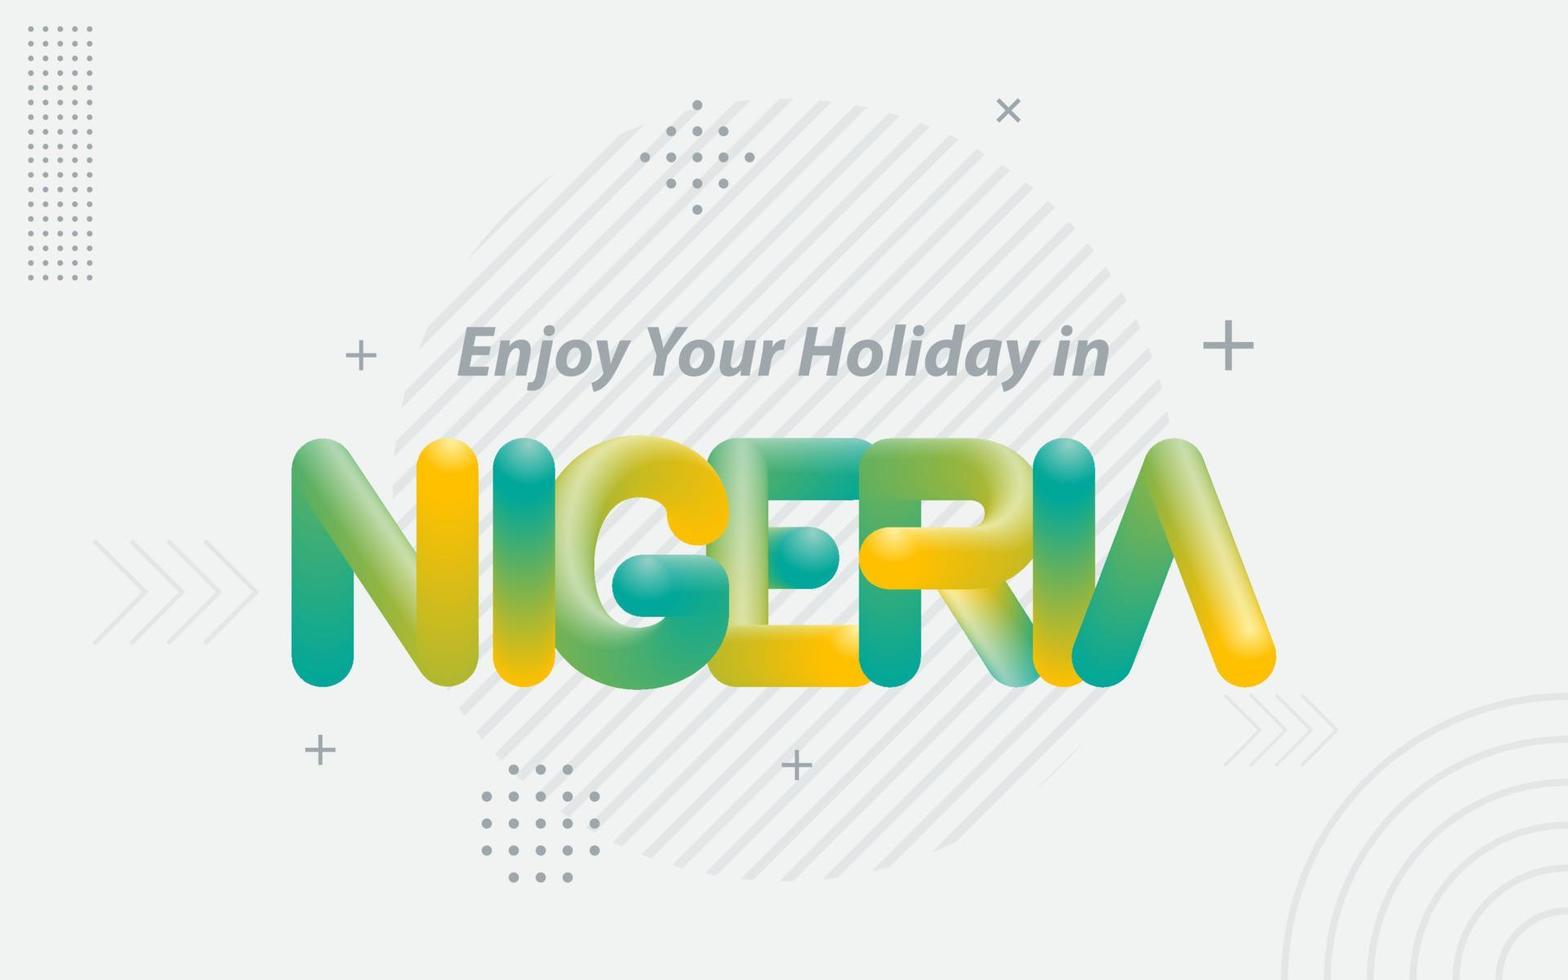 Enjoy your Holiday in Nigeria. Creative Typography with 3d Blend effect vector